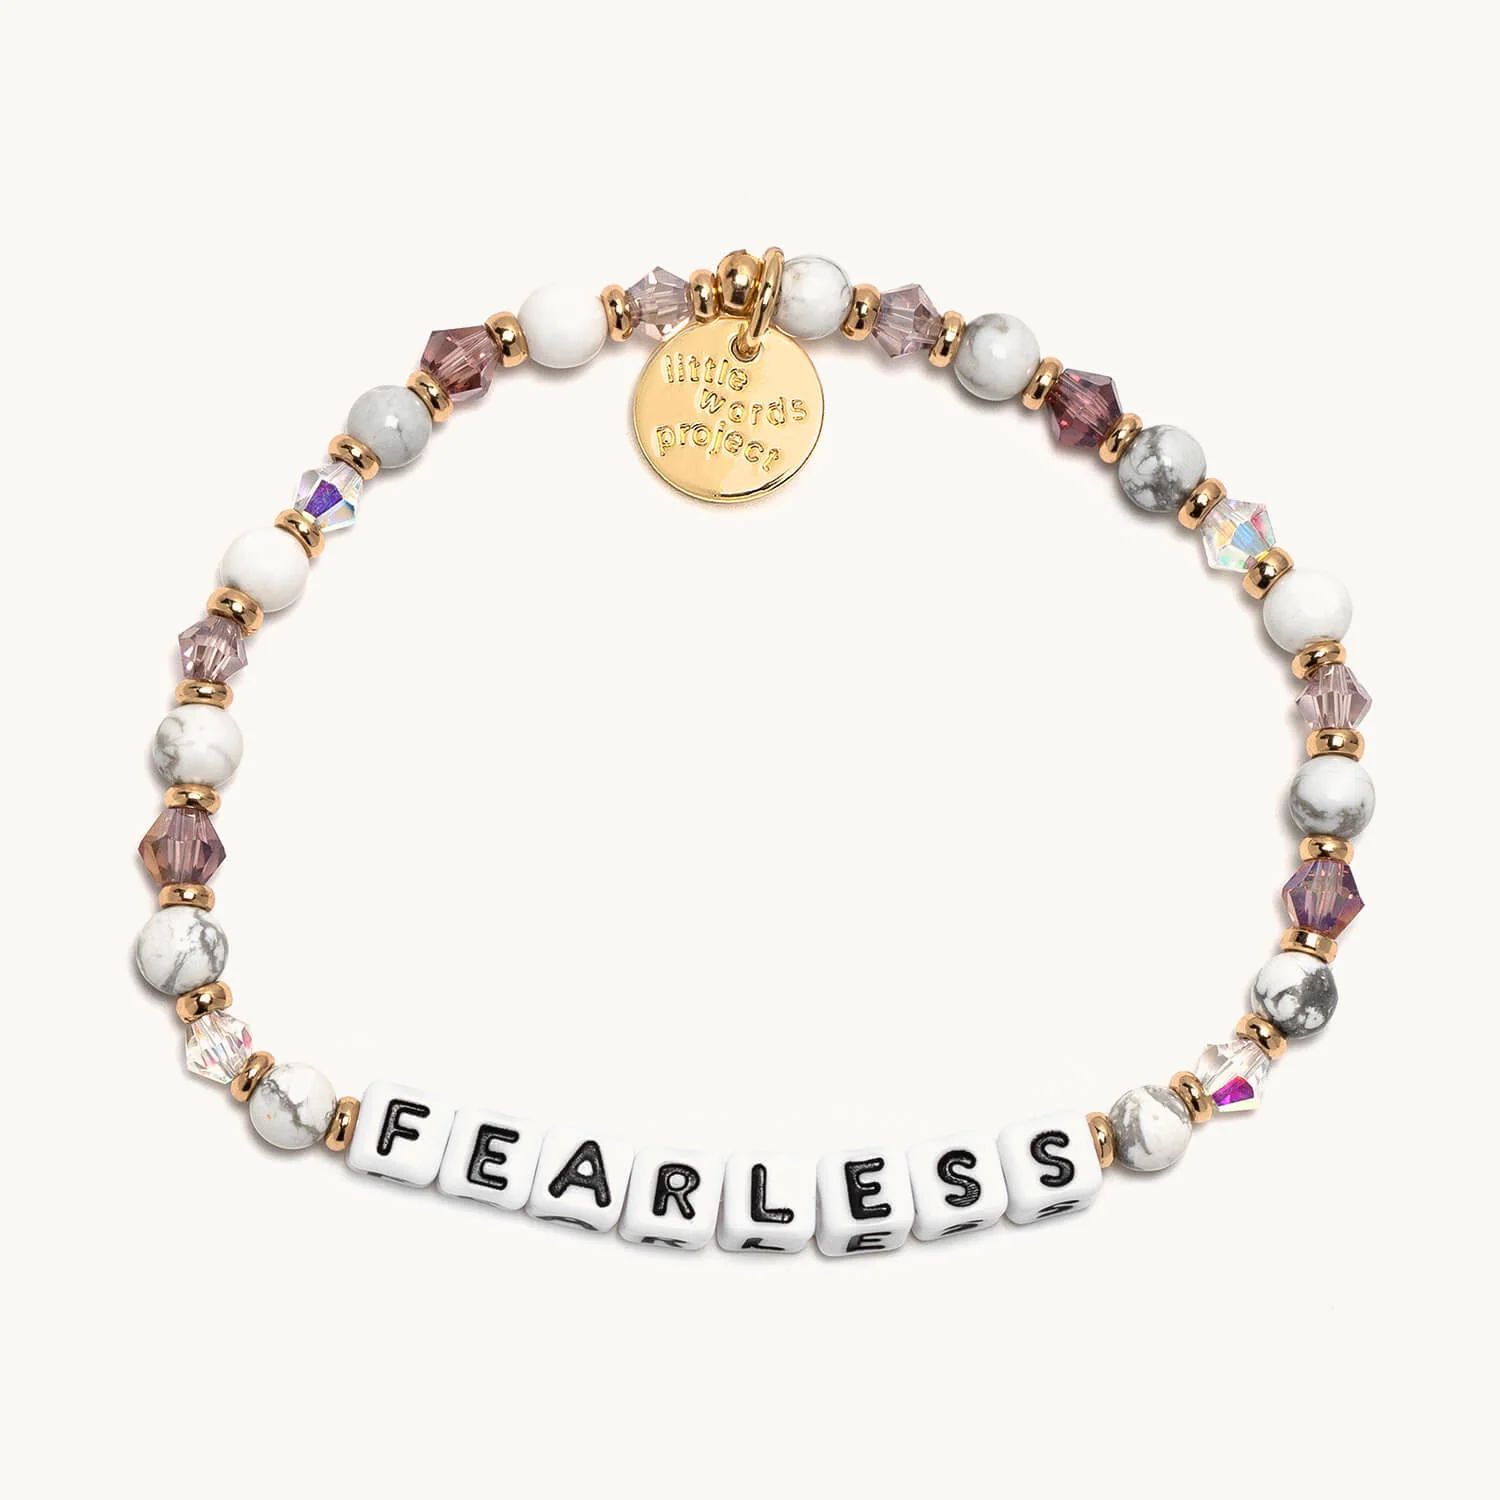 Fearless- Best Of | Little Words Project